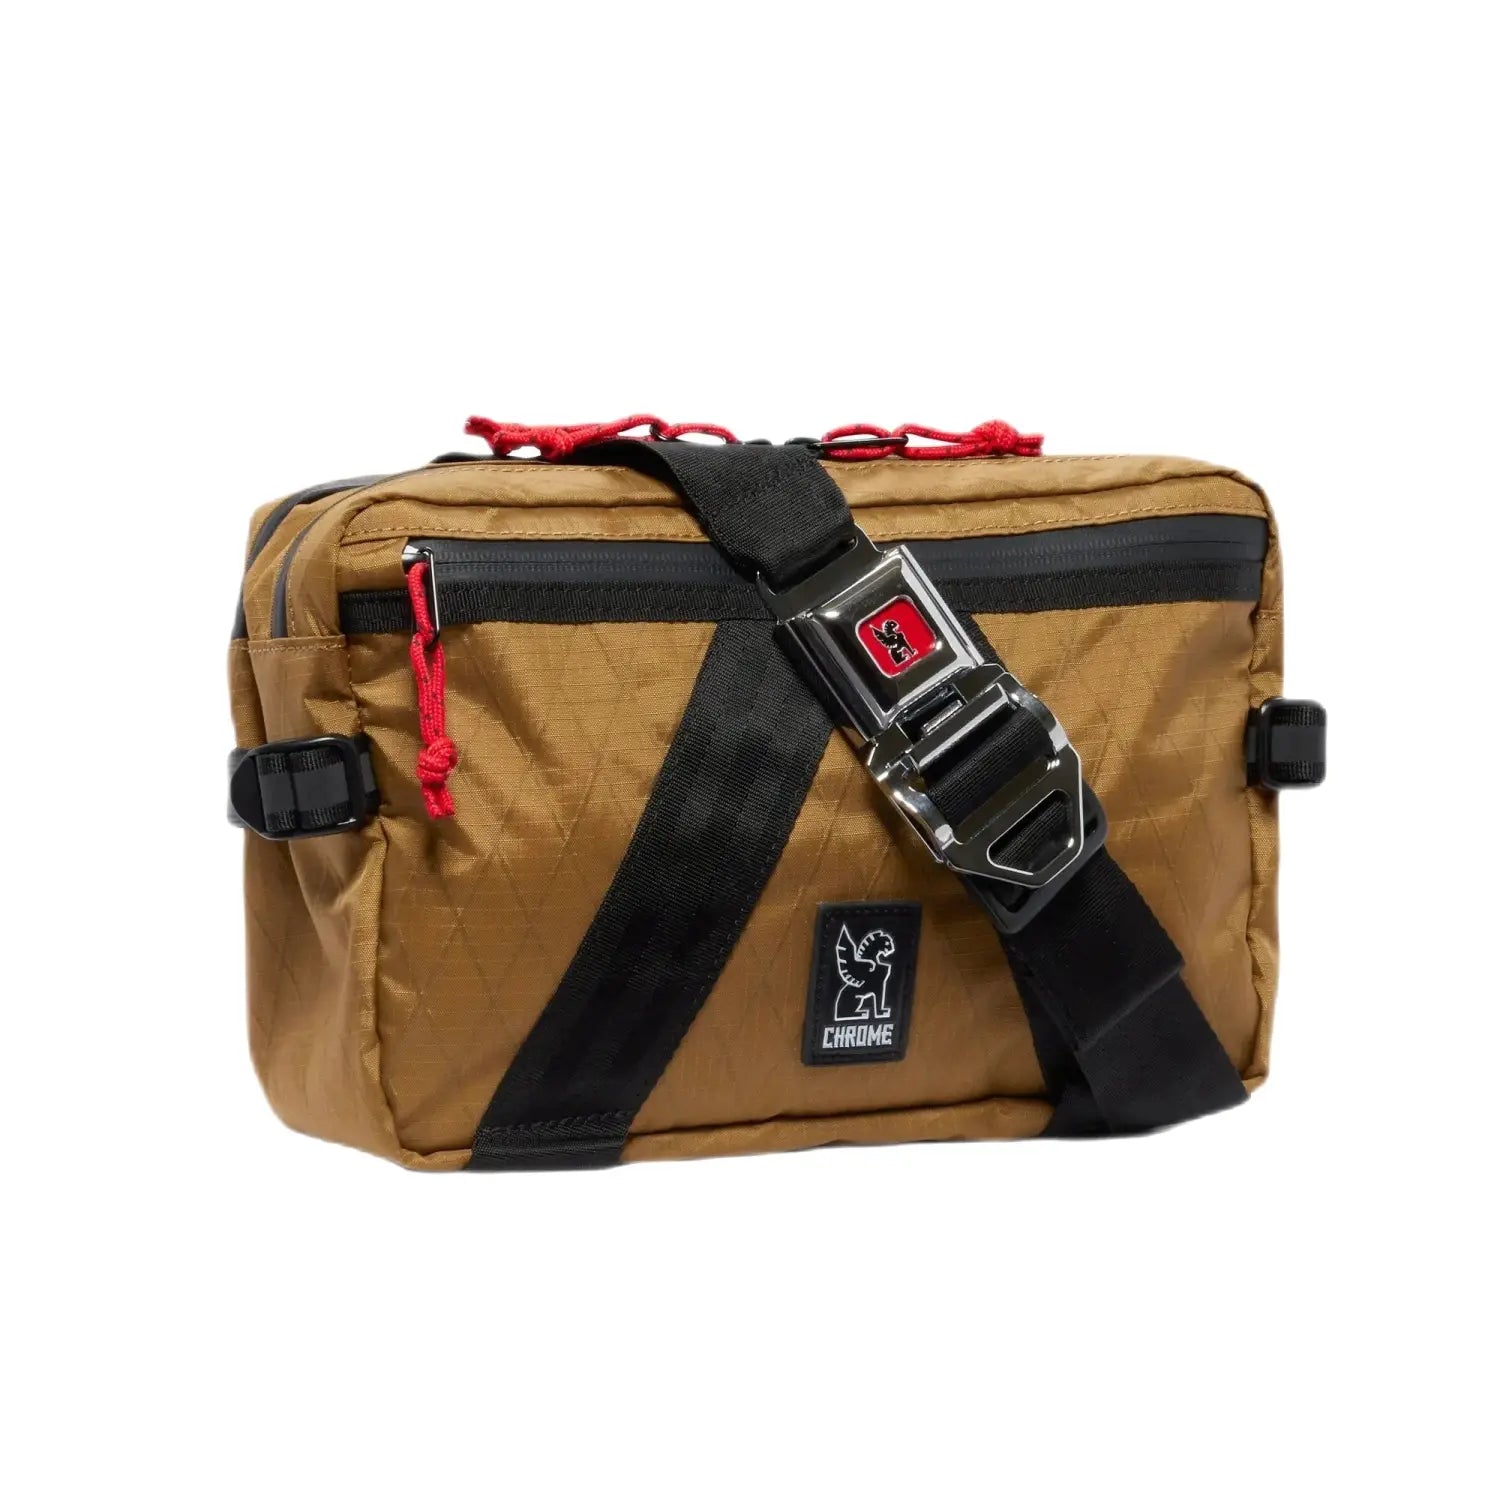 Chrome Industries Tensile Sling Bag shown in the Amber-X color option. Front view angle.